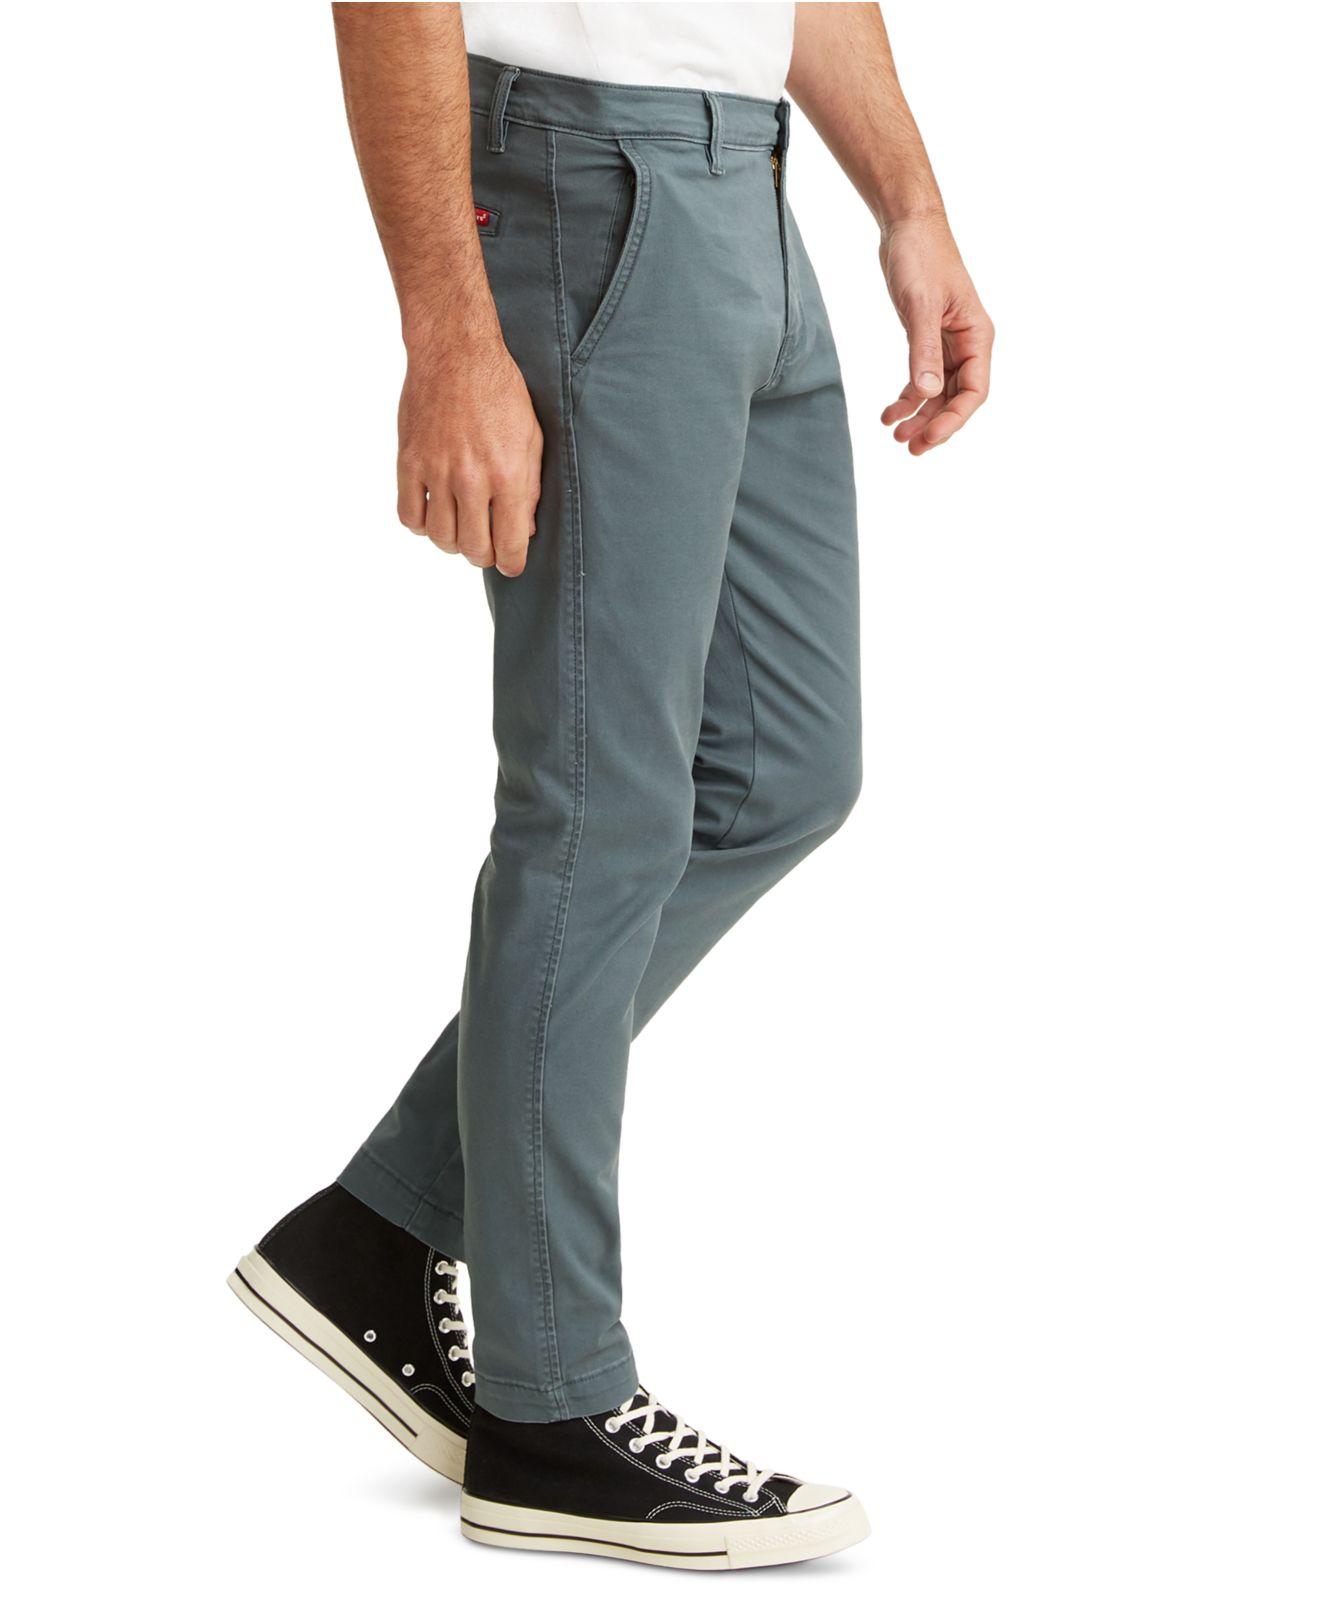 Levi's Cotton Xx Tapered Chino Pants in dk Slate (Blue) for Men - Lyst